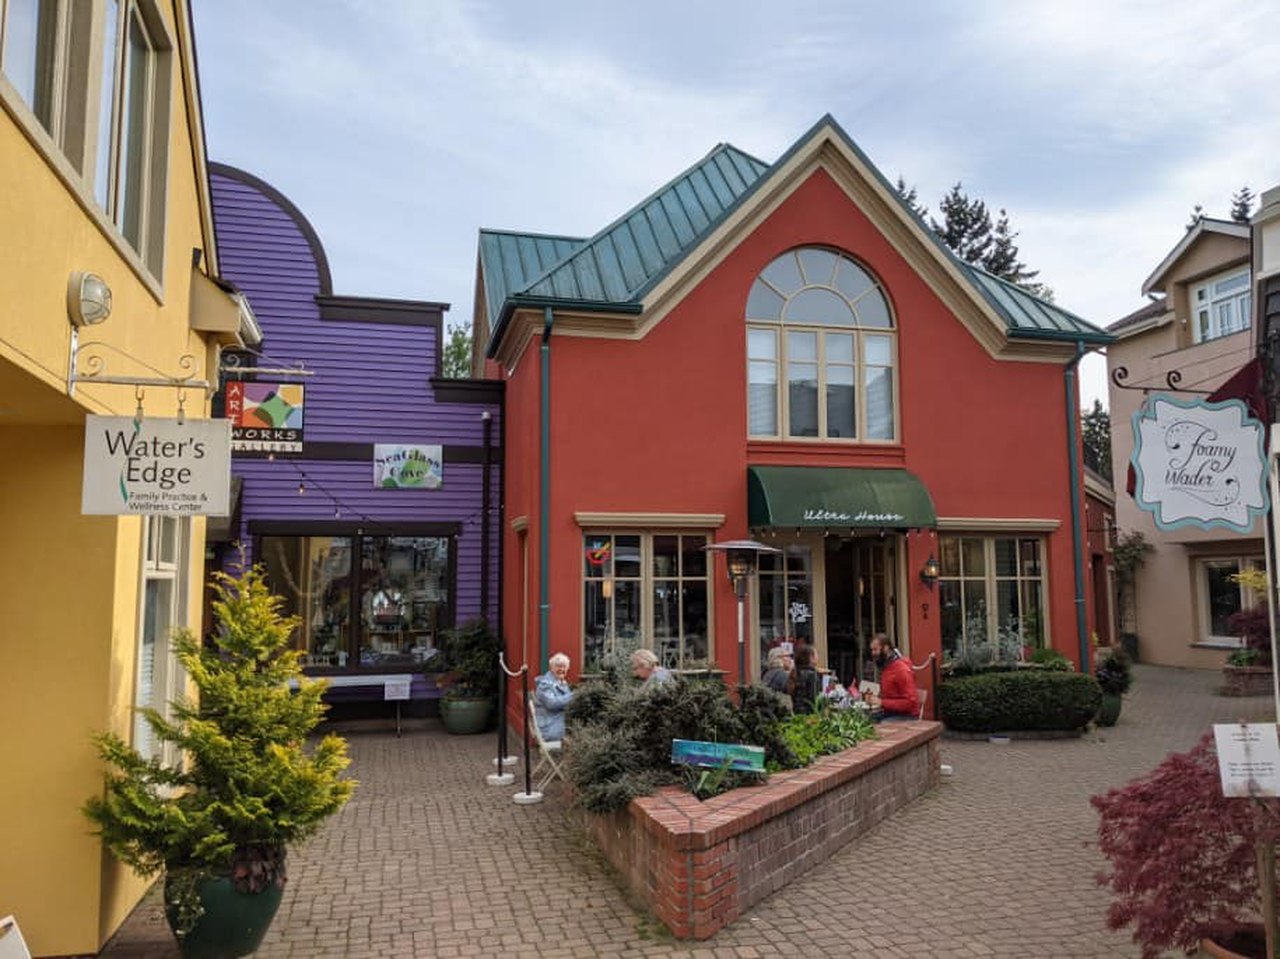  Langley Is A Small Town With Only 1,000 Residents But Has Some Of The Best Food In Washington 